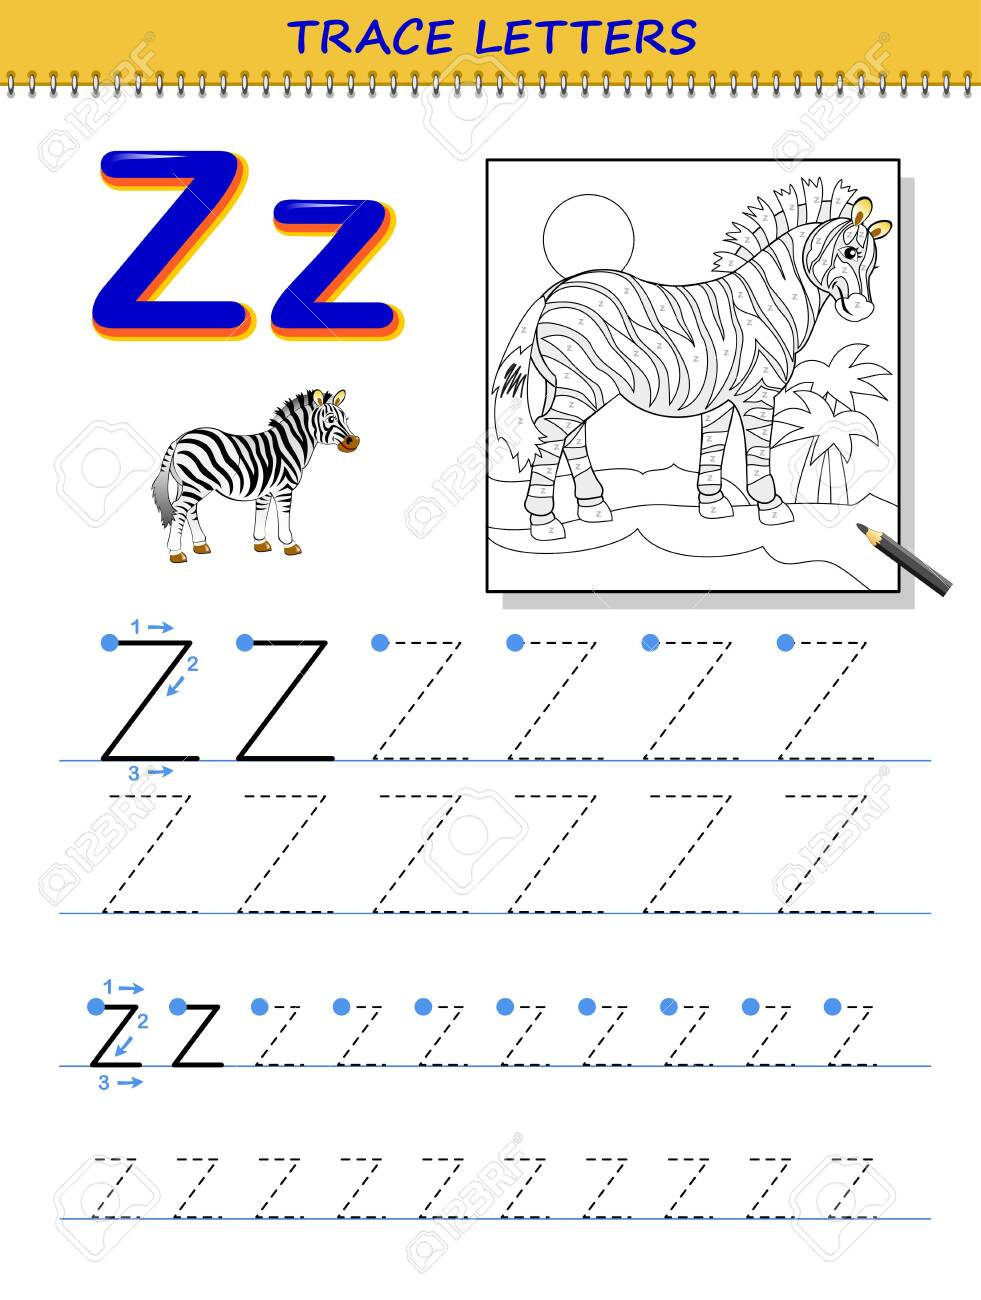 English For Kids Step By Step Letter Tracing Worksheets Letters U Z Tracing Letter Z Worksheet 